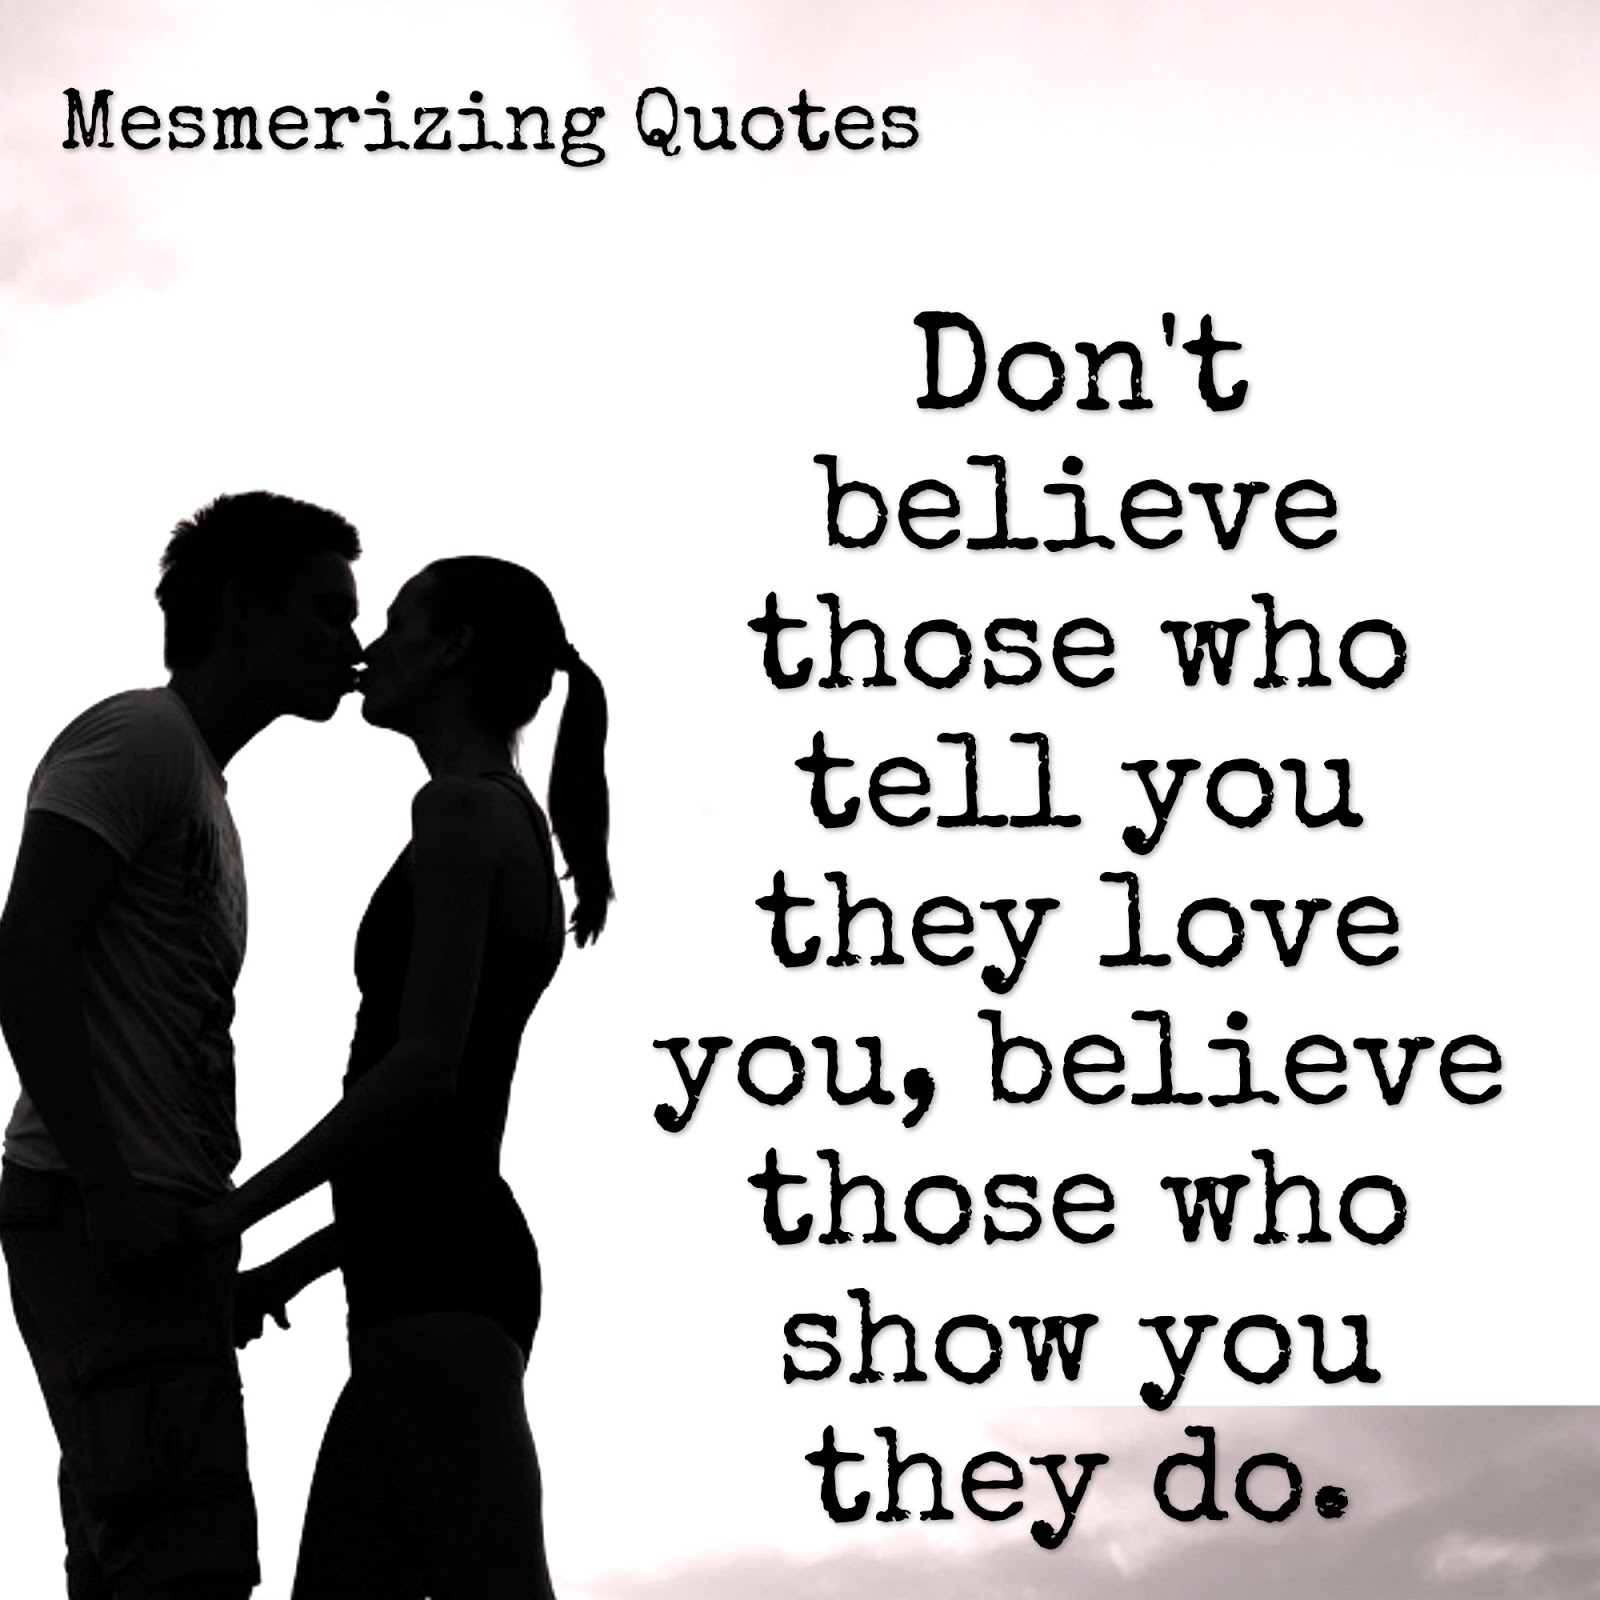 Believe those who show you love